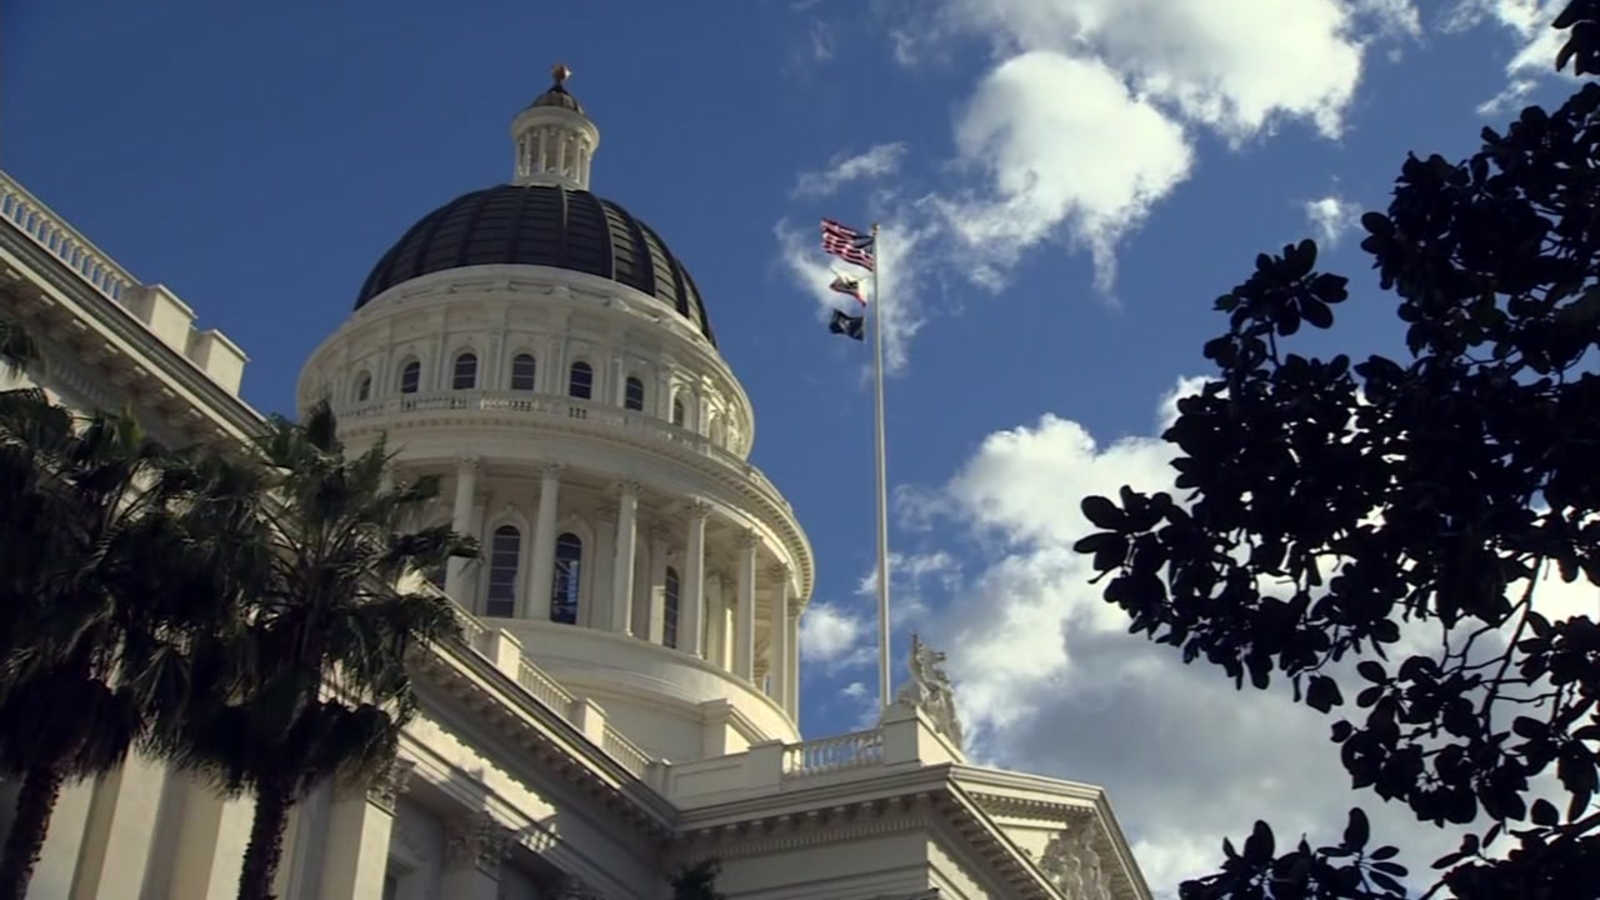 Psychedelic therapy, workers’ rights bills fail to advance in California’s tough budget year [Video]